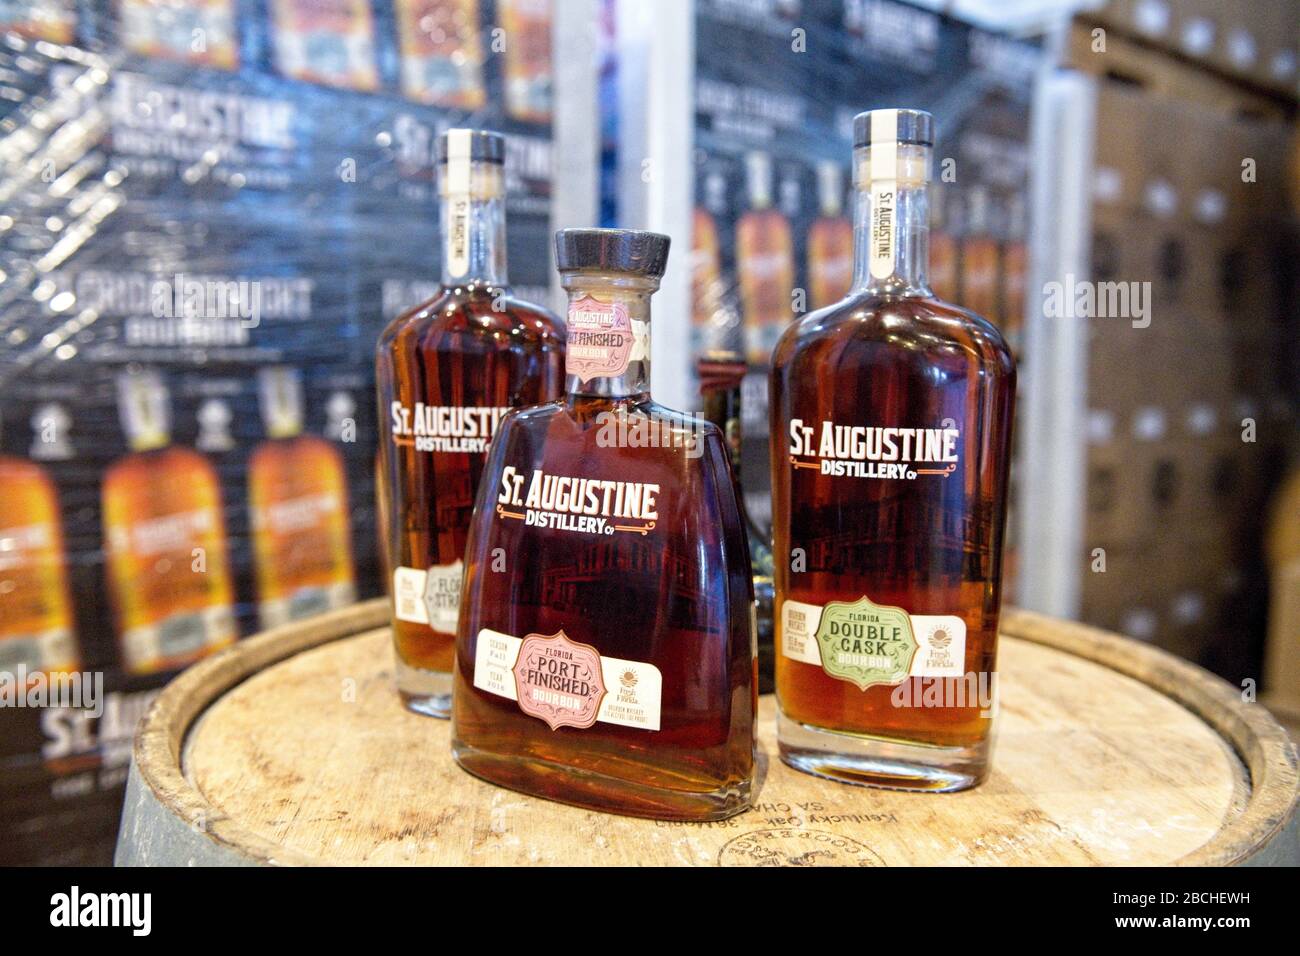 Bottles of whiskey on display at St. Augustine Distillery in St. Augustine, Florida USA Stock Photo